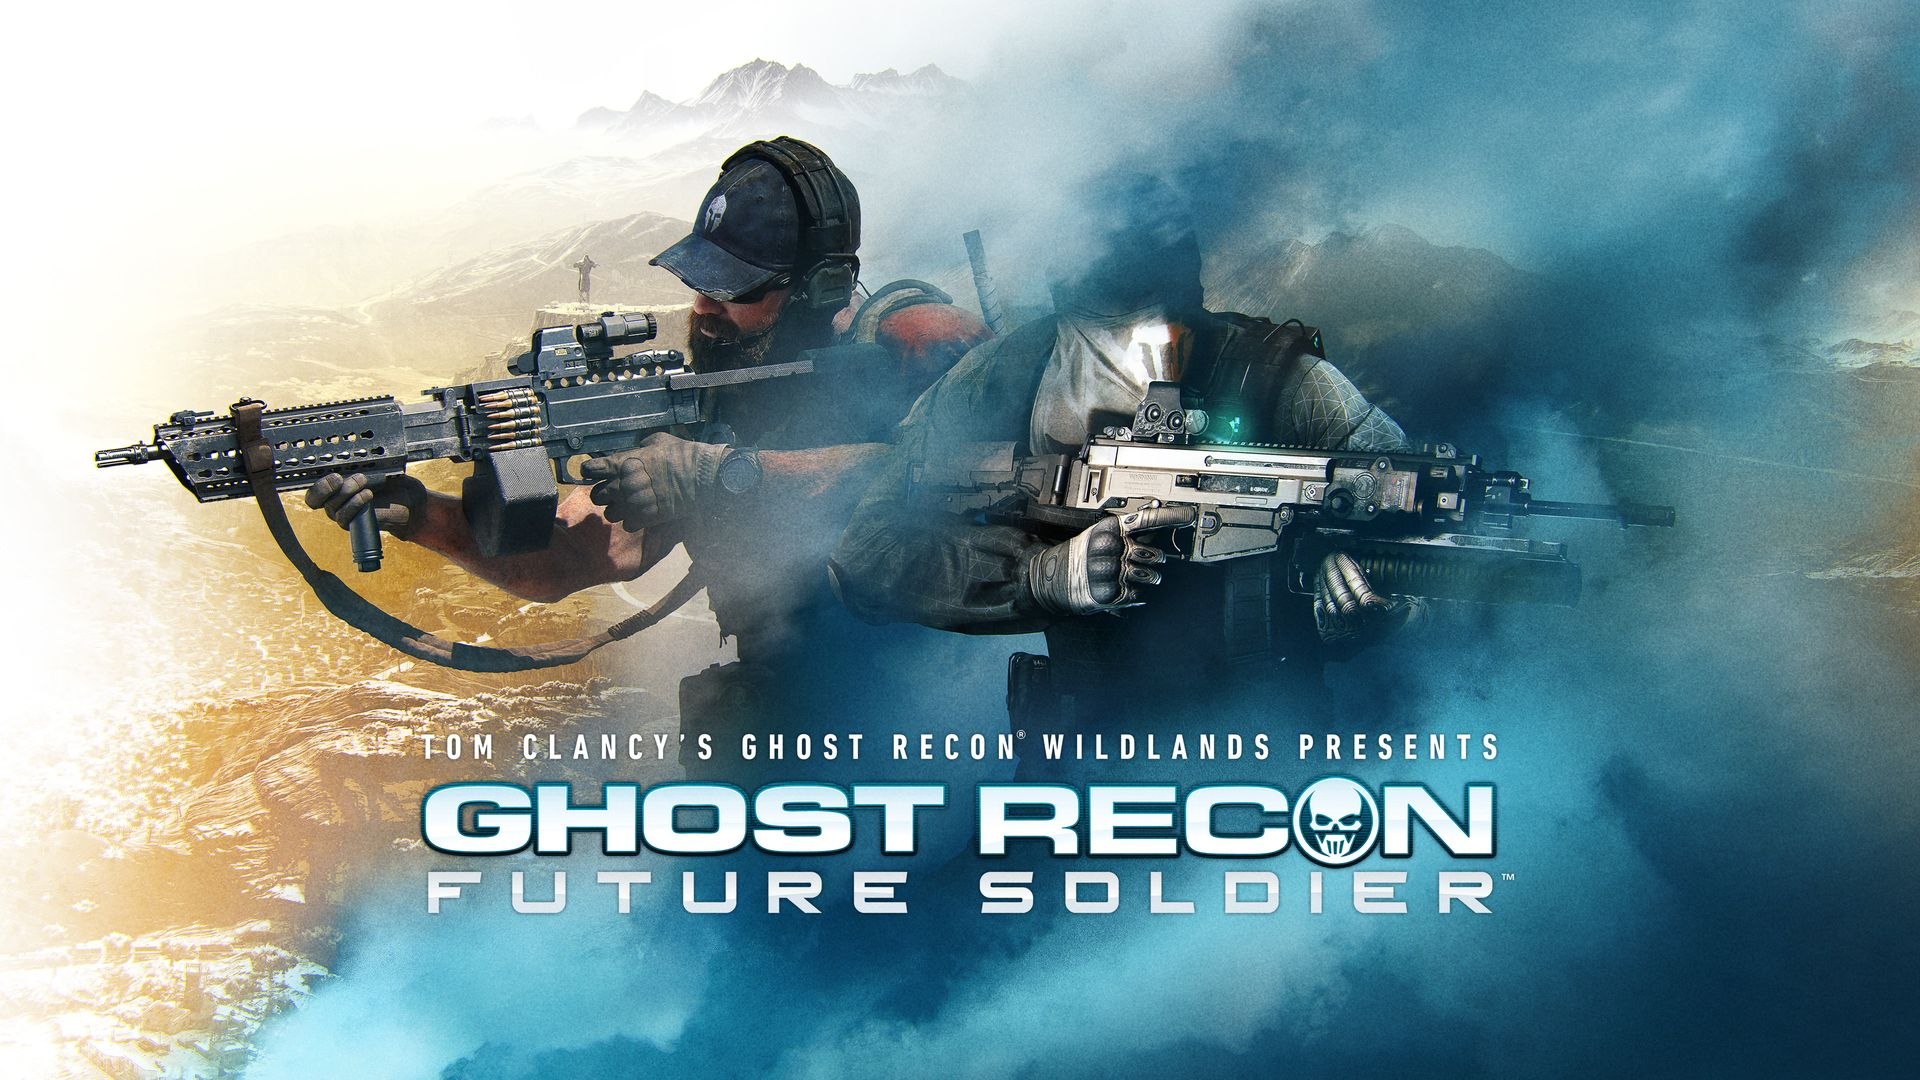 Ghost Recon Wildlands ปล่อยตัวอย่างเนื้อหาเสริม Special Operation 3: Ghost Recon Future Soldier